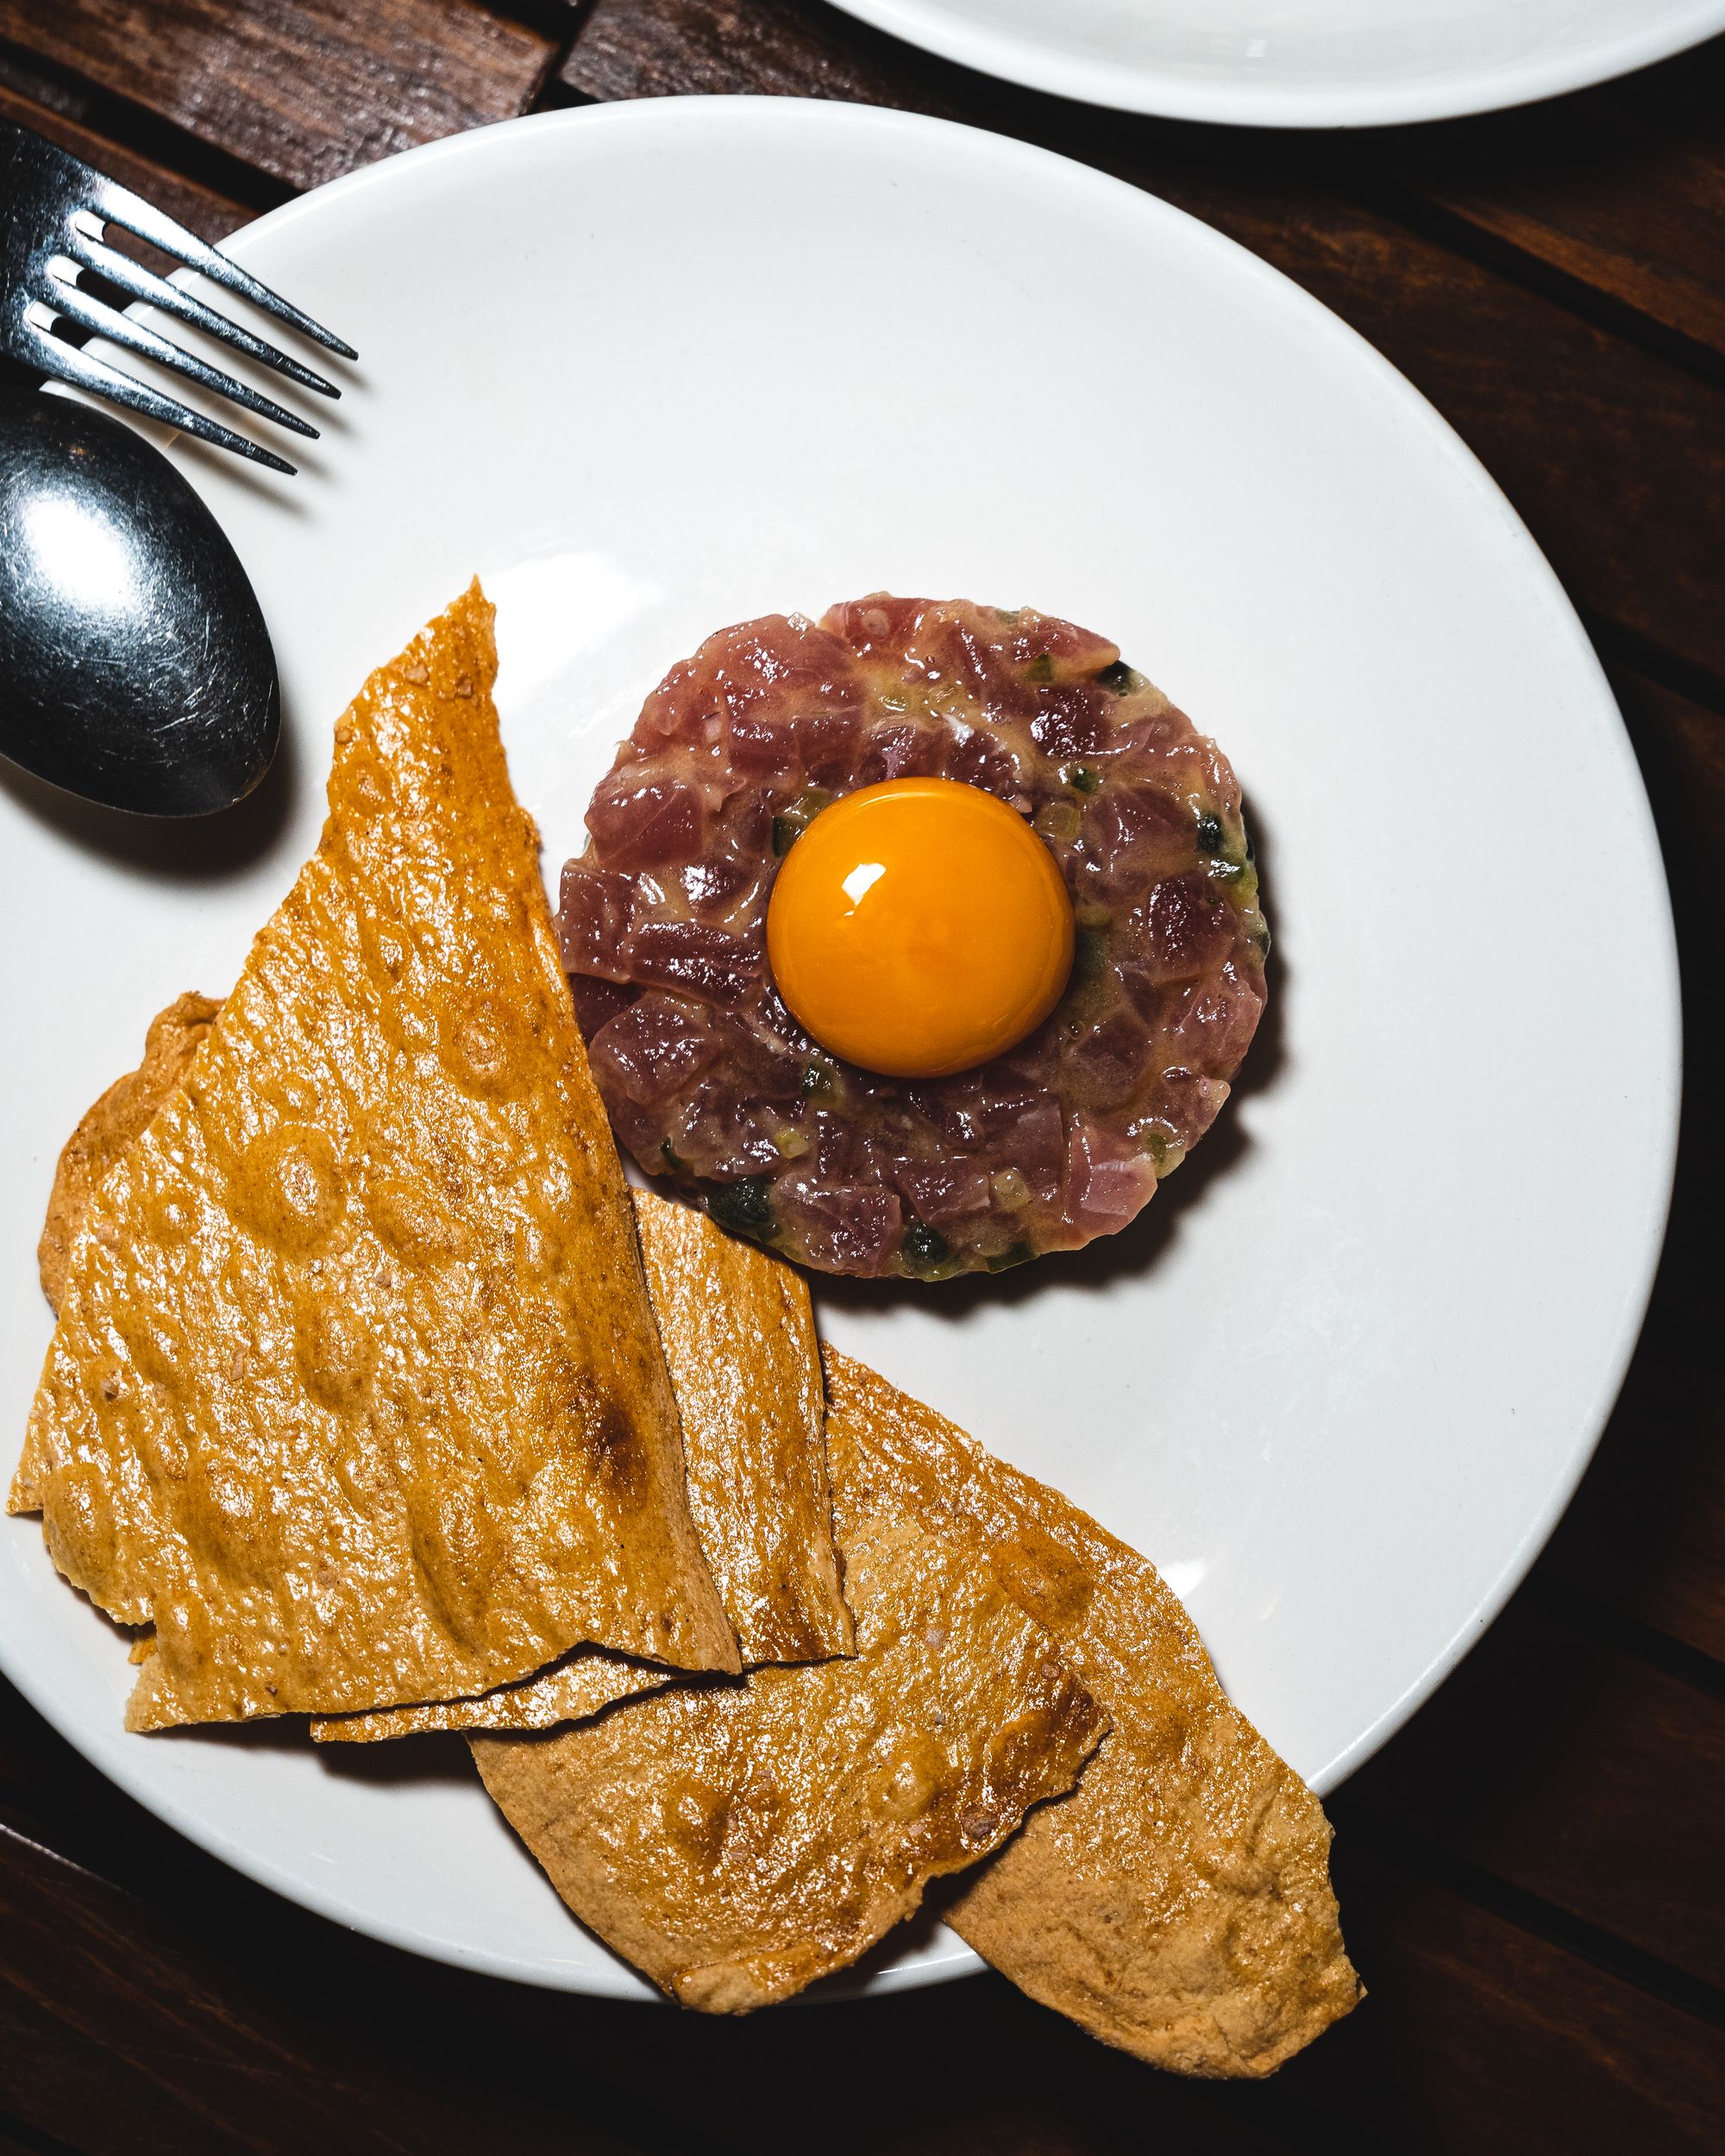 Raw tuna shaped in a circle with an egg yolk on top with crisps served on the side